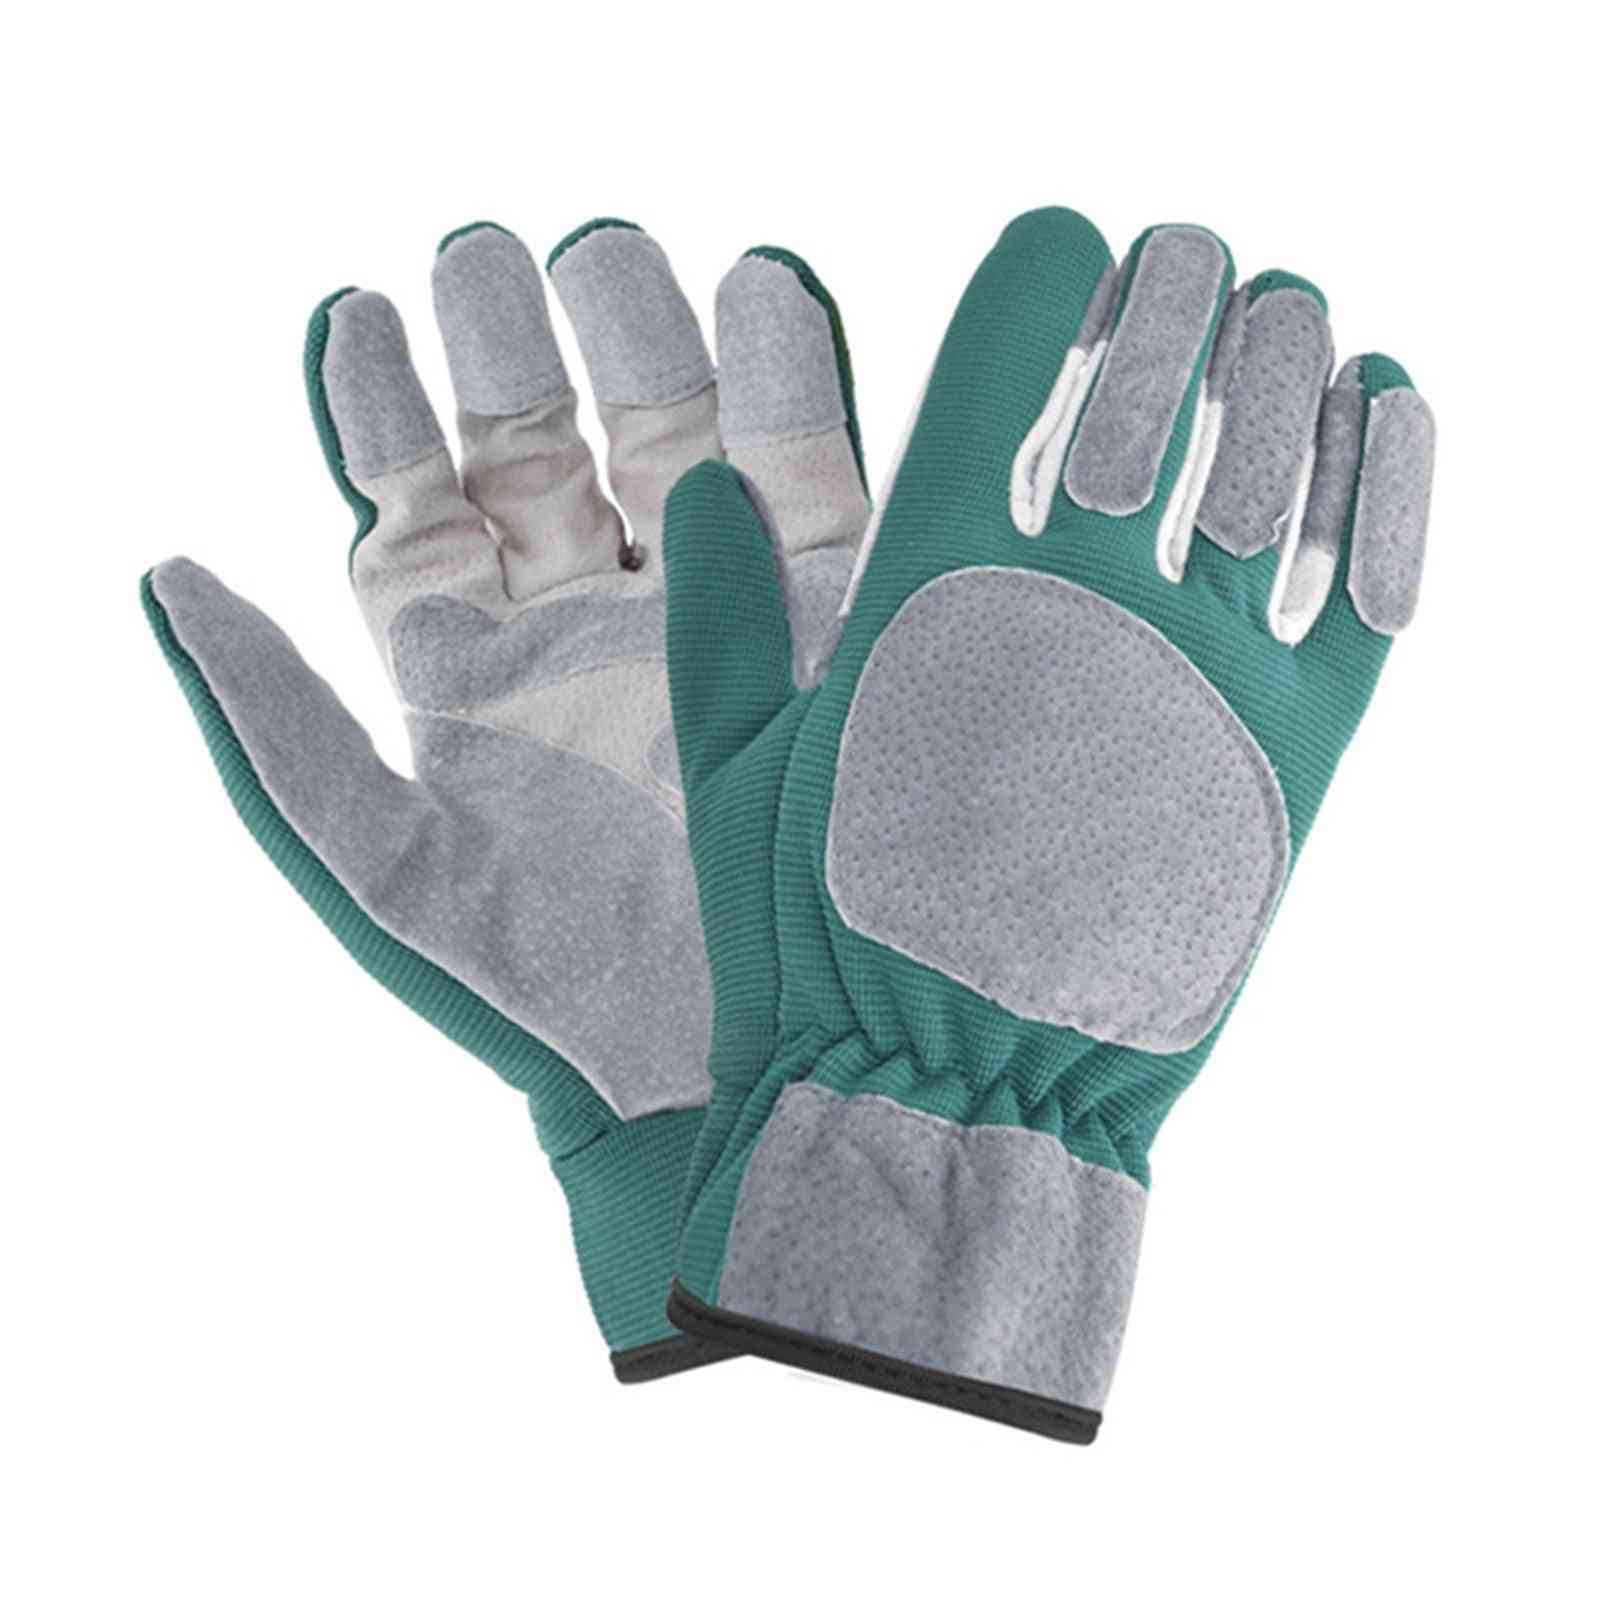 Pruning Thorn Gloves With Long Forearm Protection